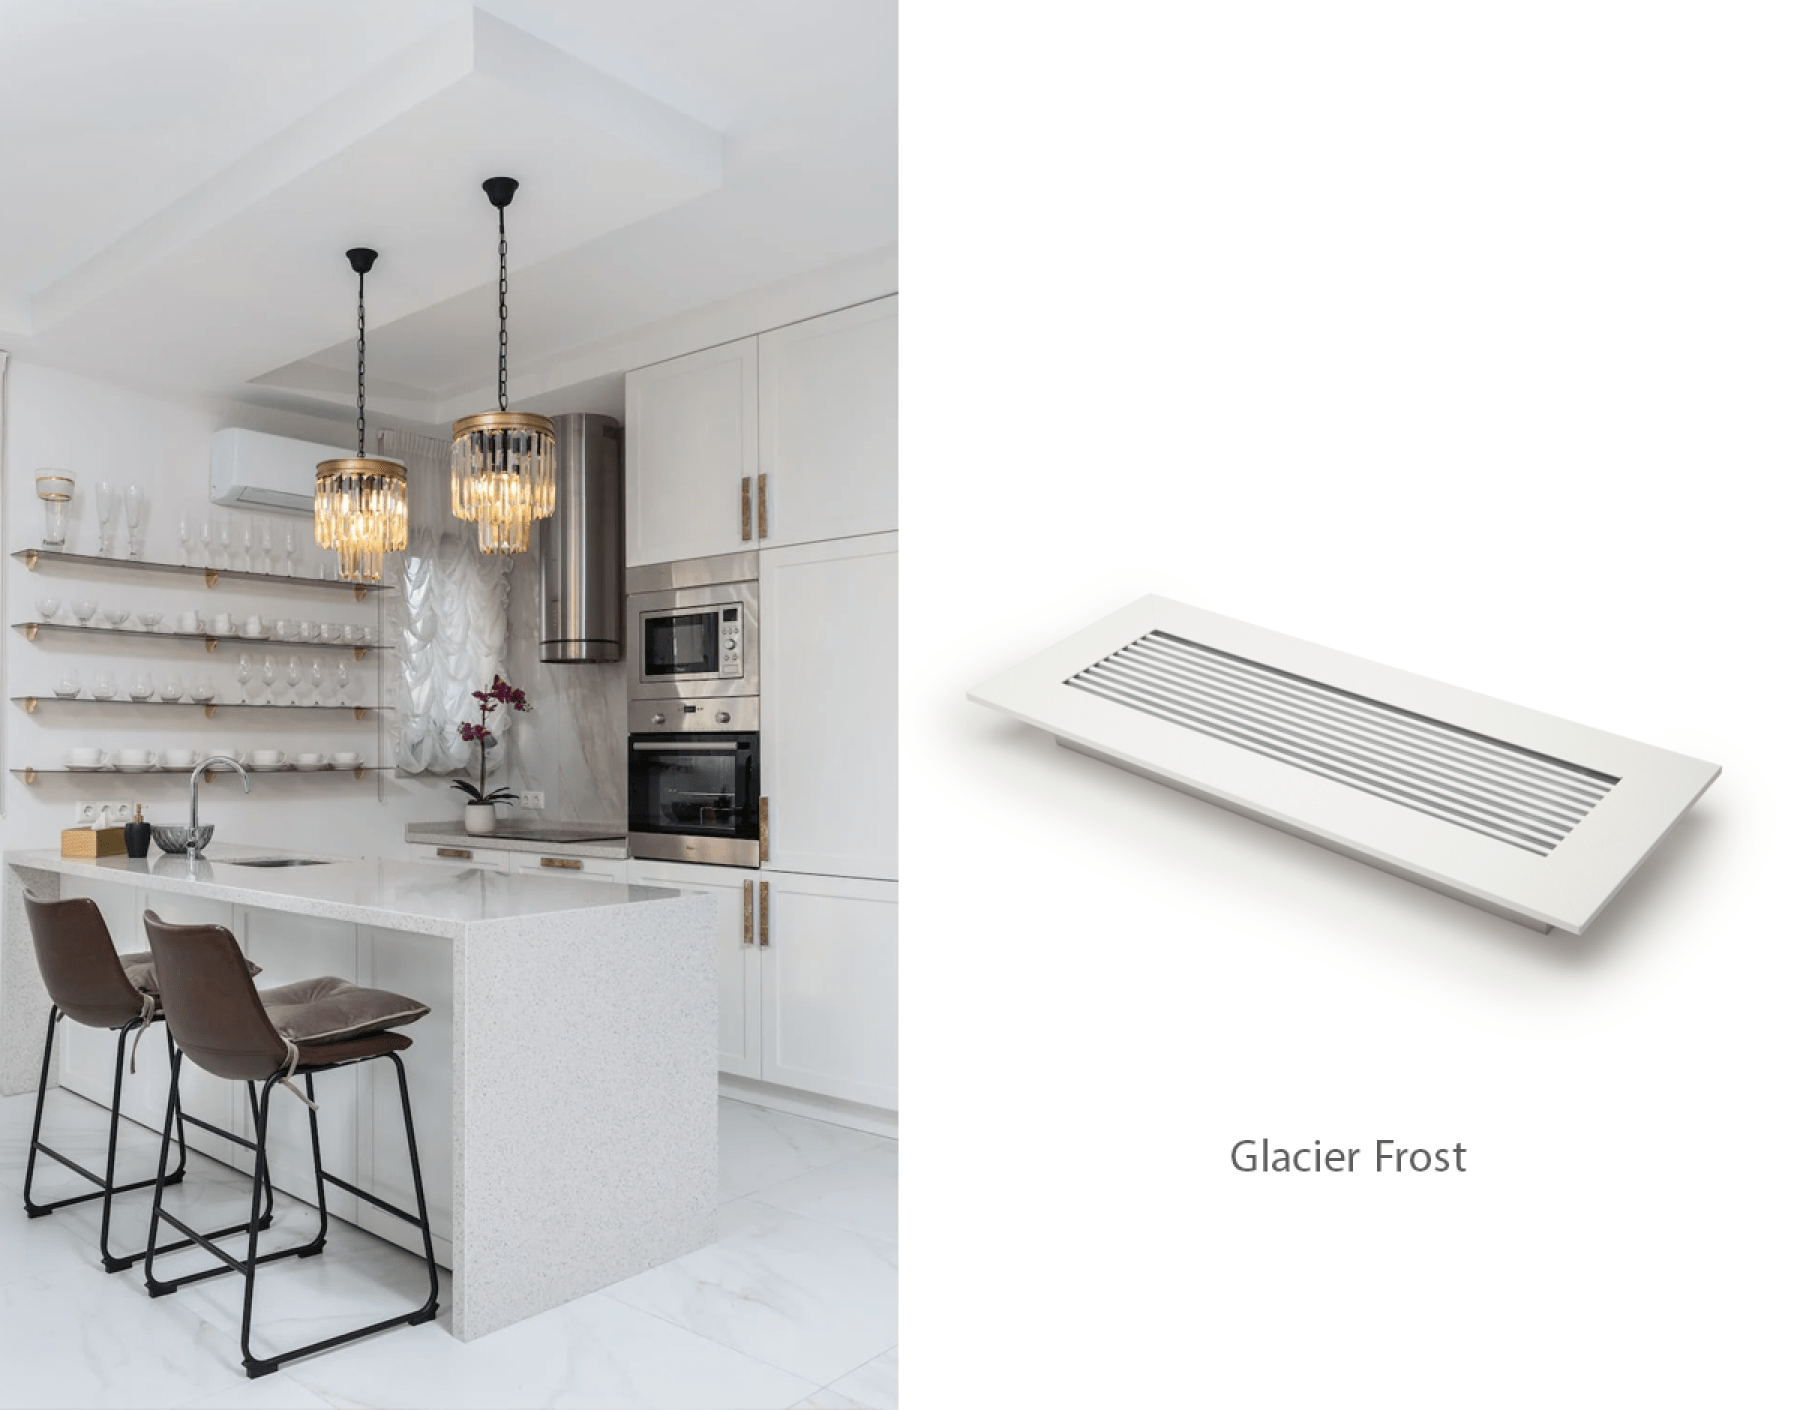 Luxury white kitchen beside Glacier Frost vent cover from kul grilles